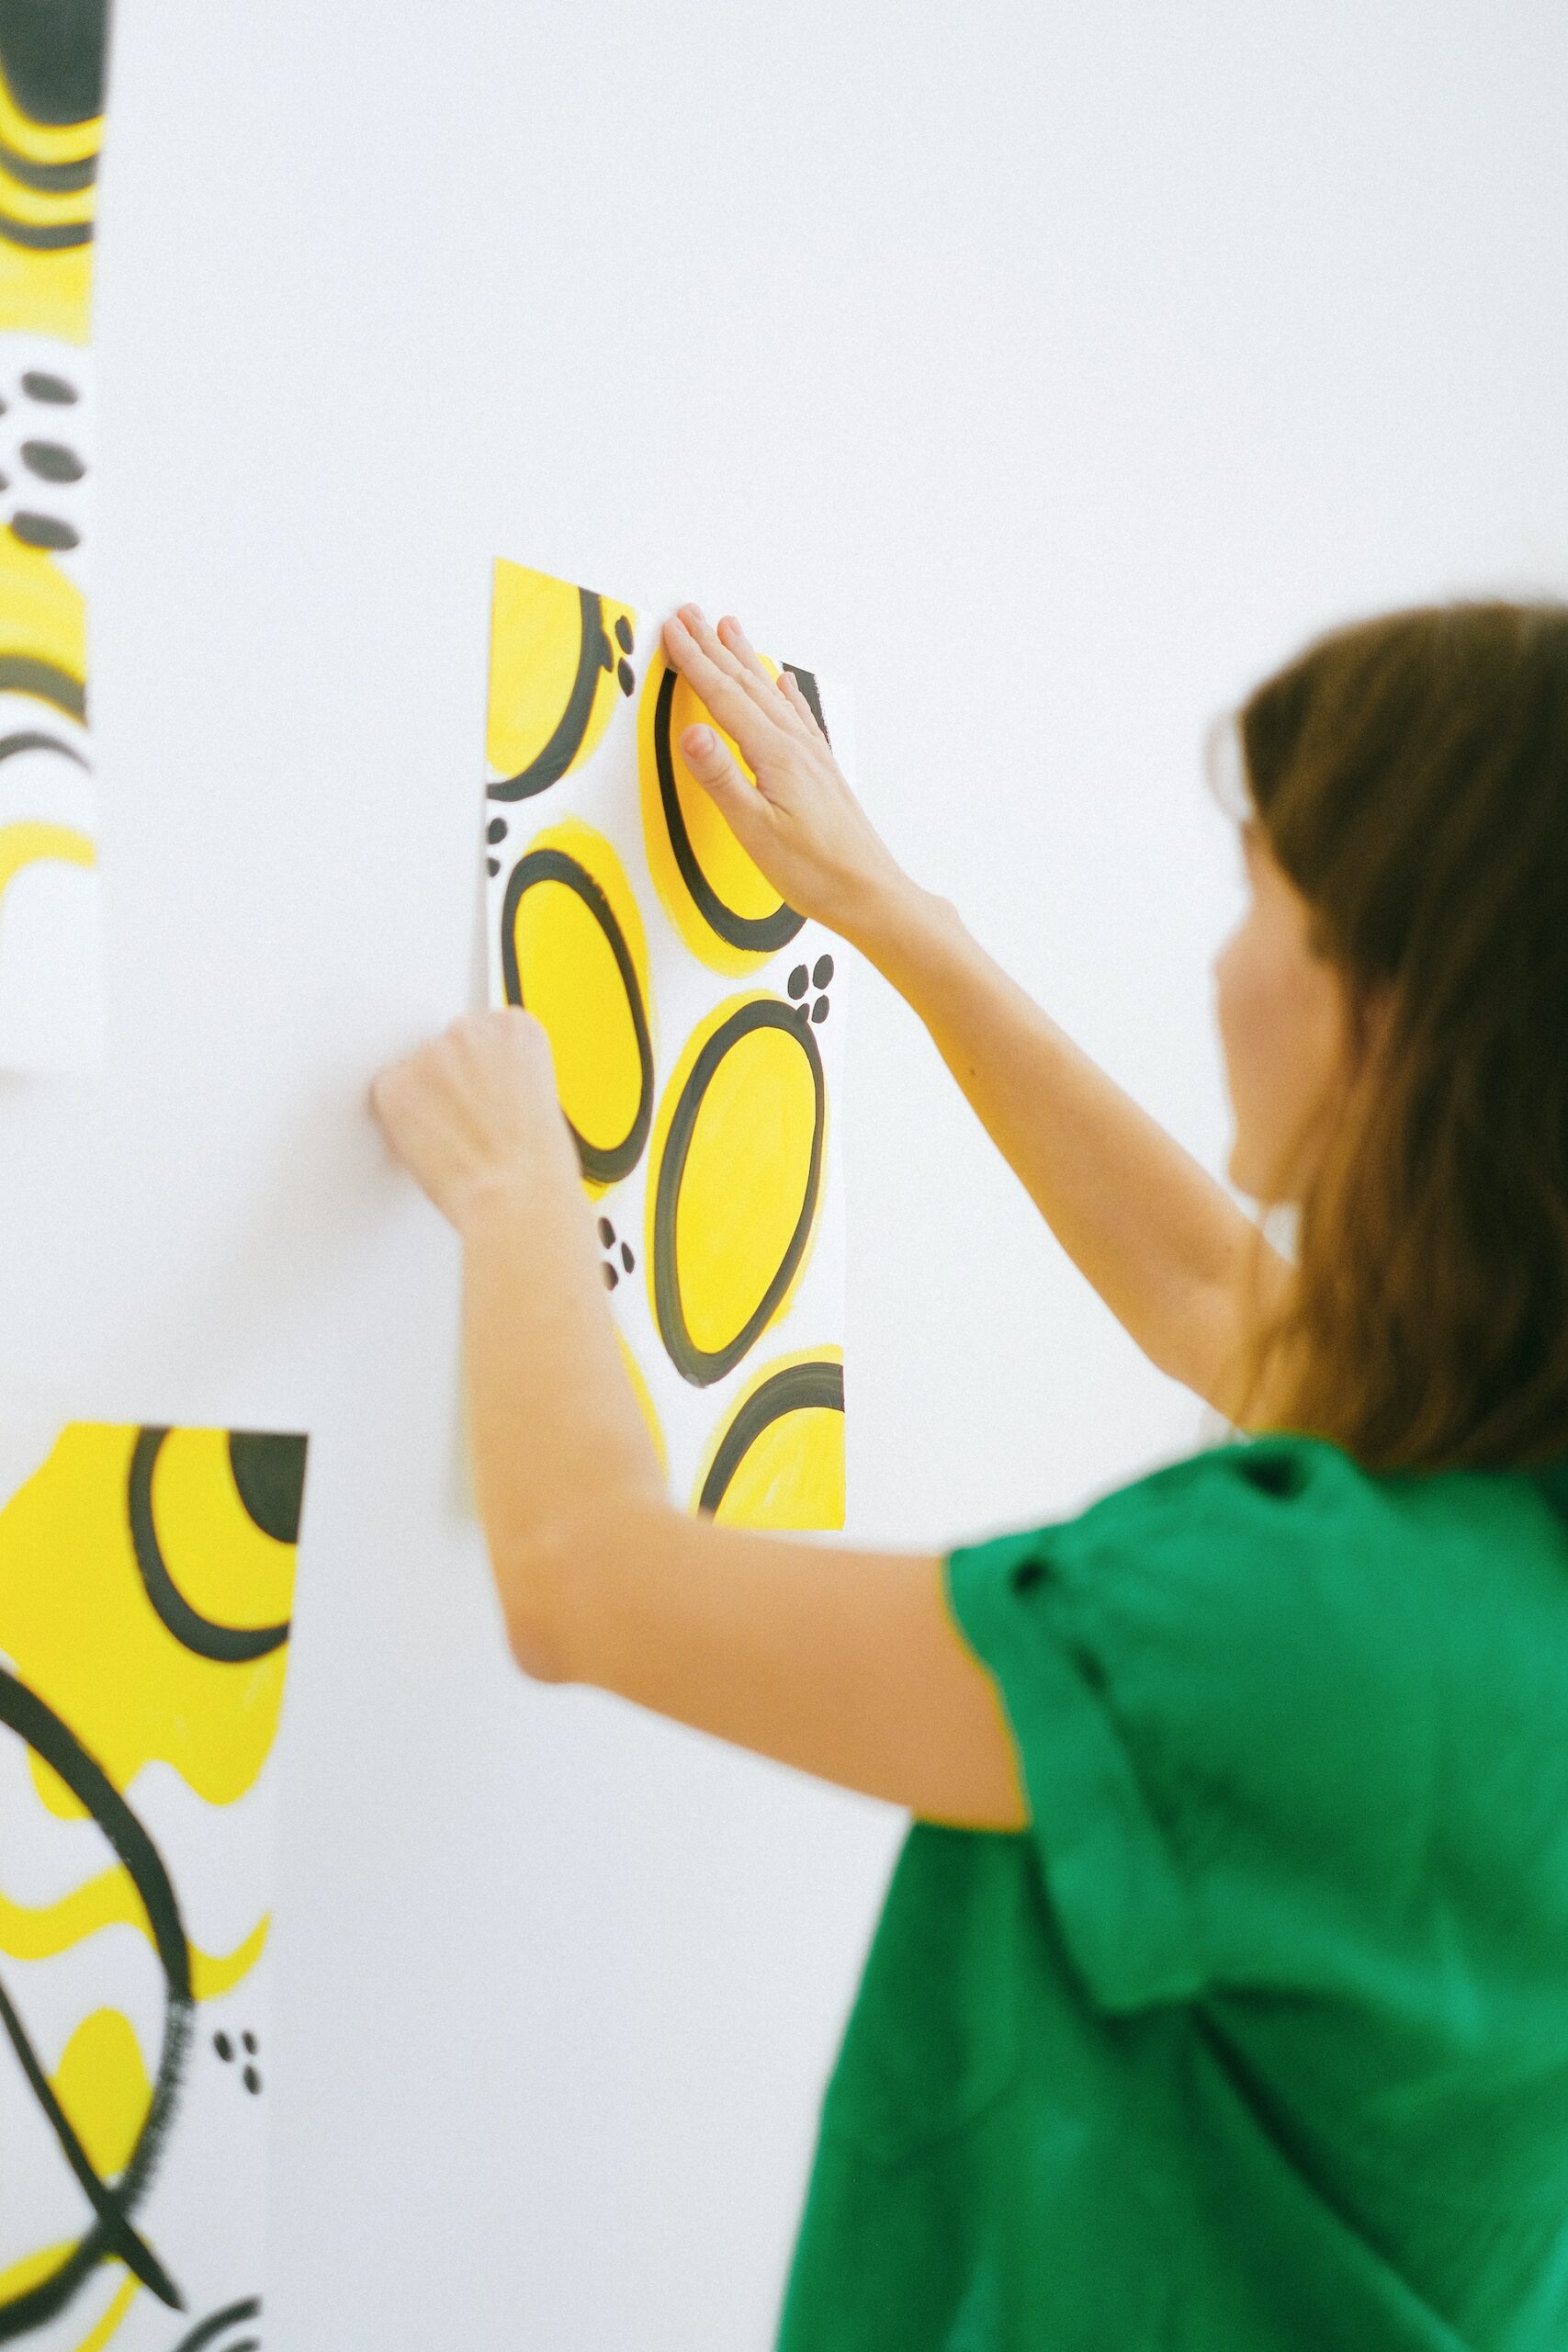 18 Ideas on How to Use Art as a Way to Express Yourself